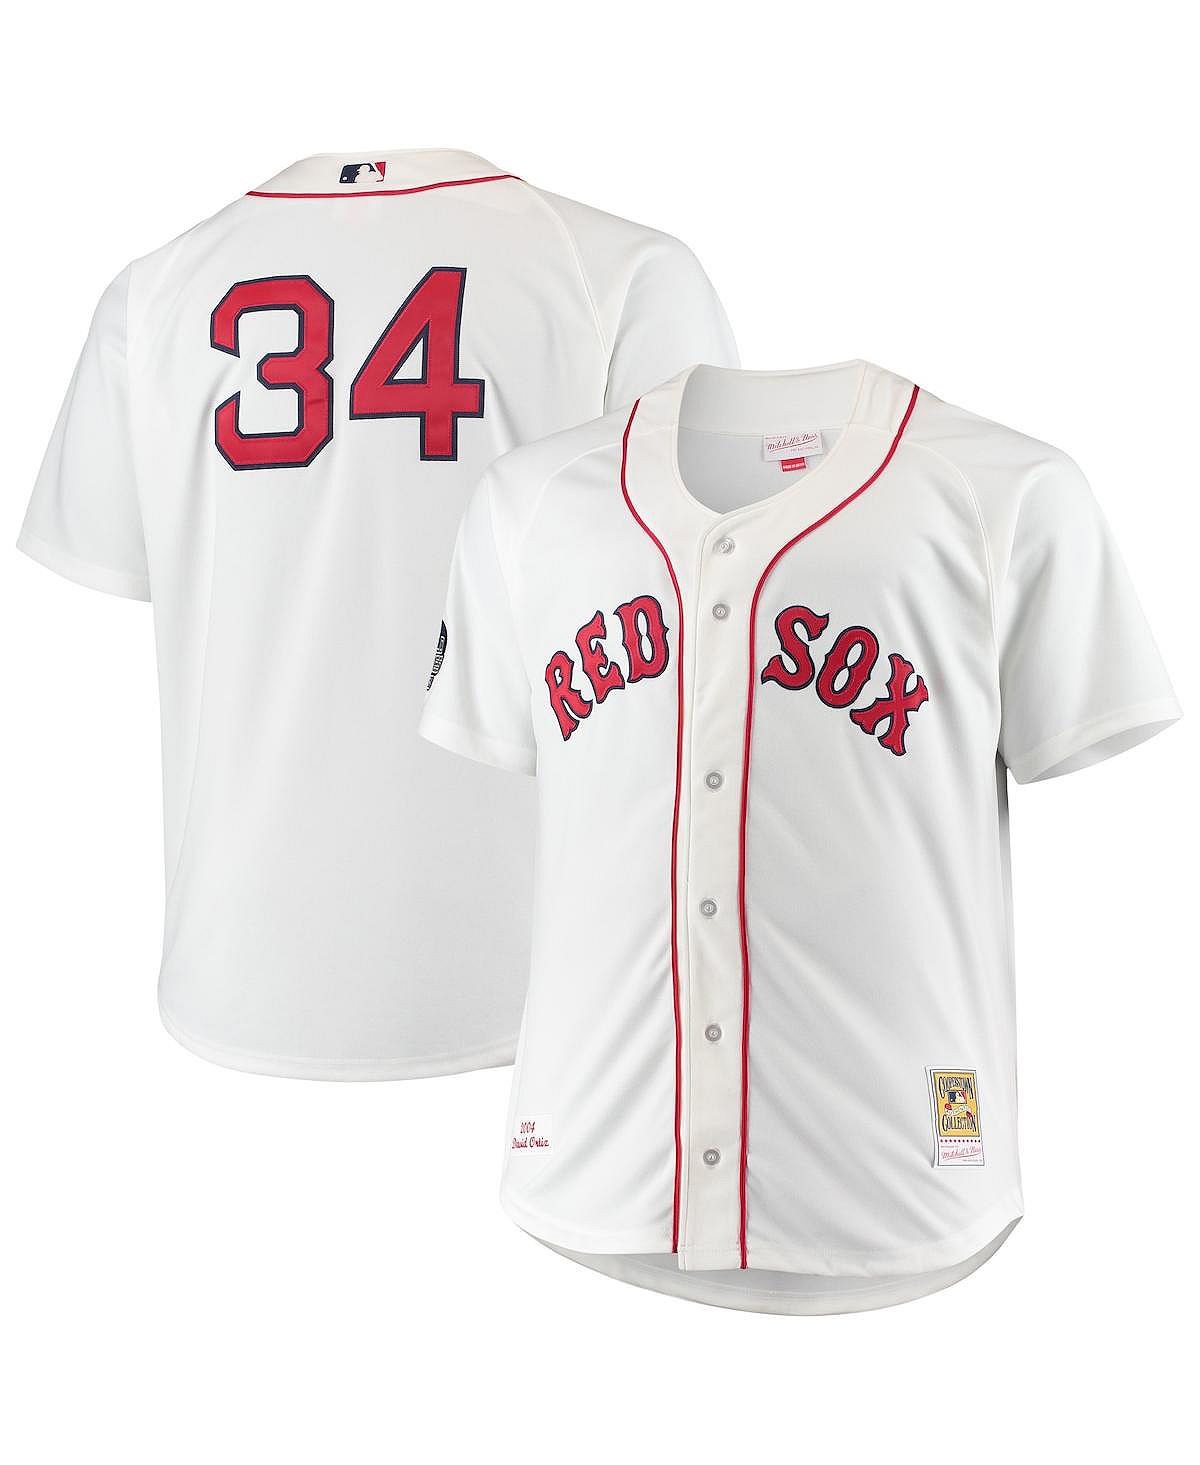 mitchell david slade house Мужская футболка david ortiz white boston red sox big and tall home authentic player jersey Mitchell & Ness, белый